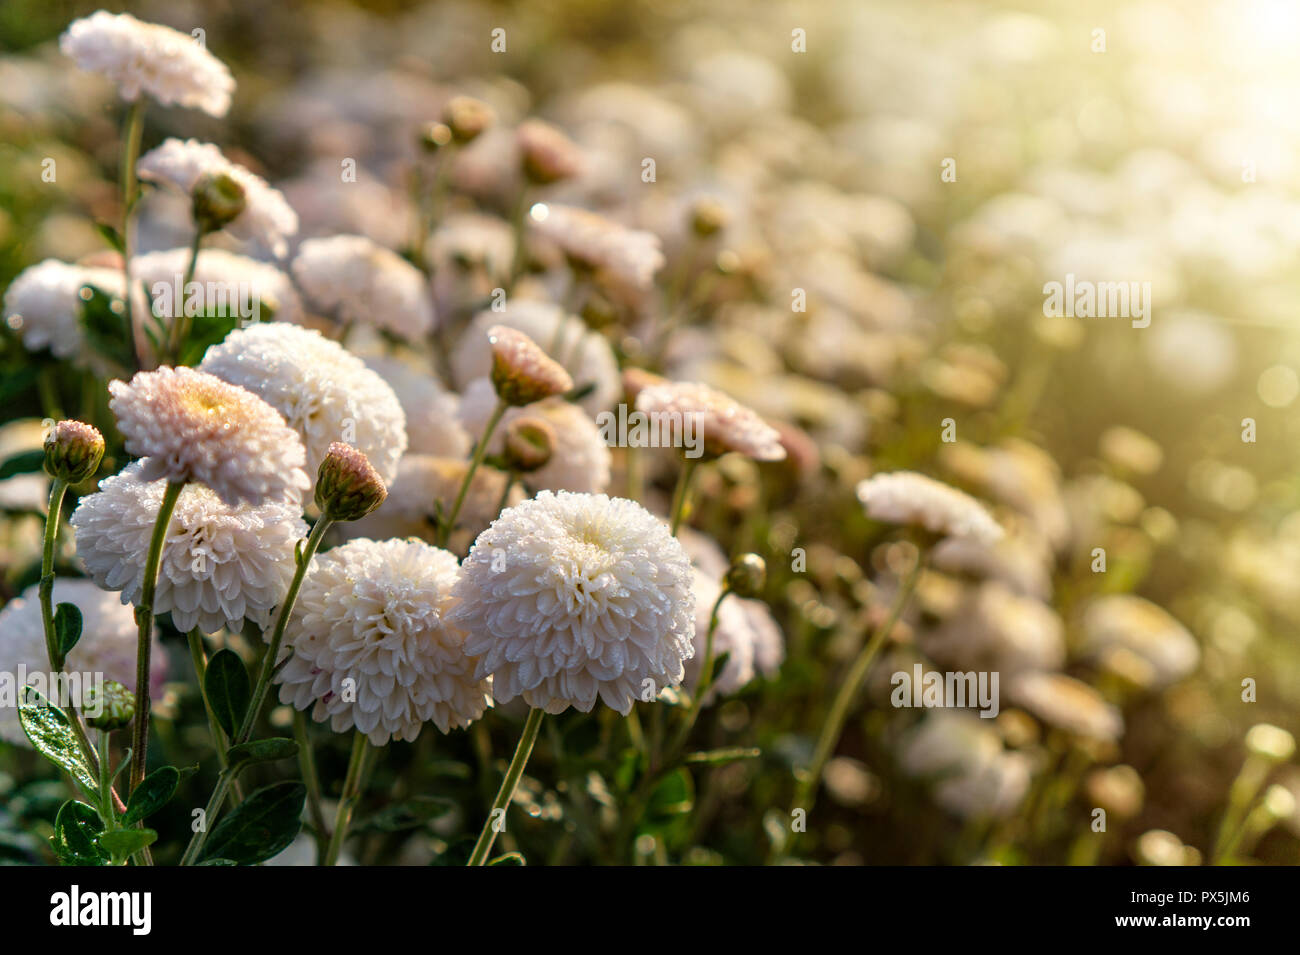 Mums Chrysanthemum field in sunlight with dew drops Stock Photo